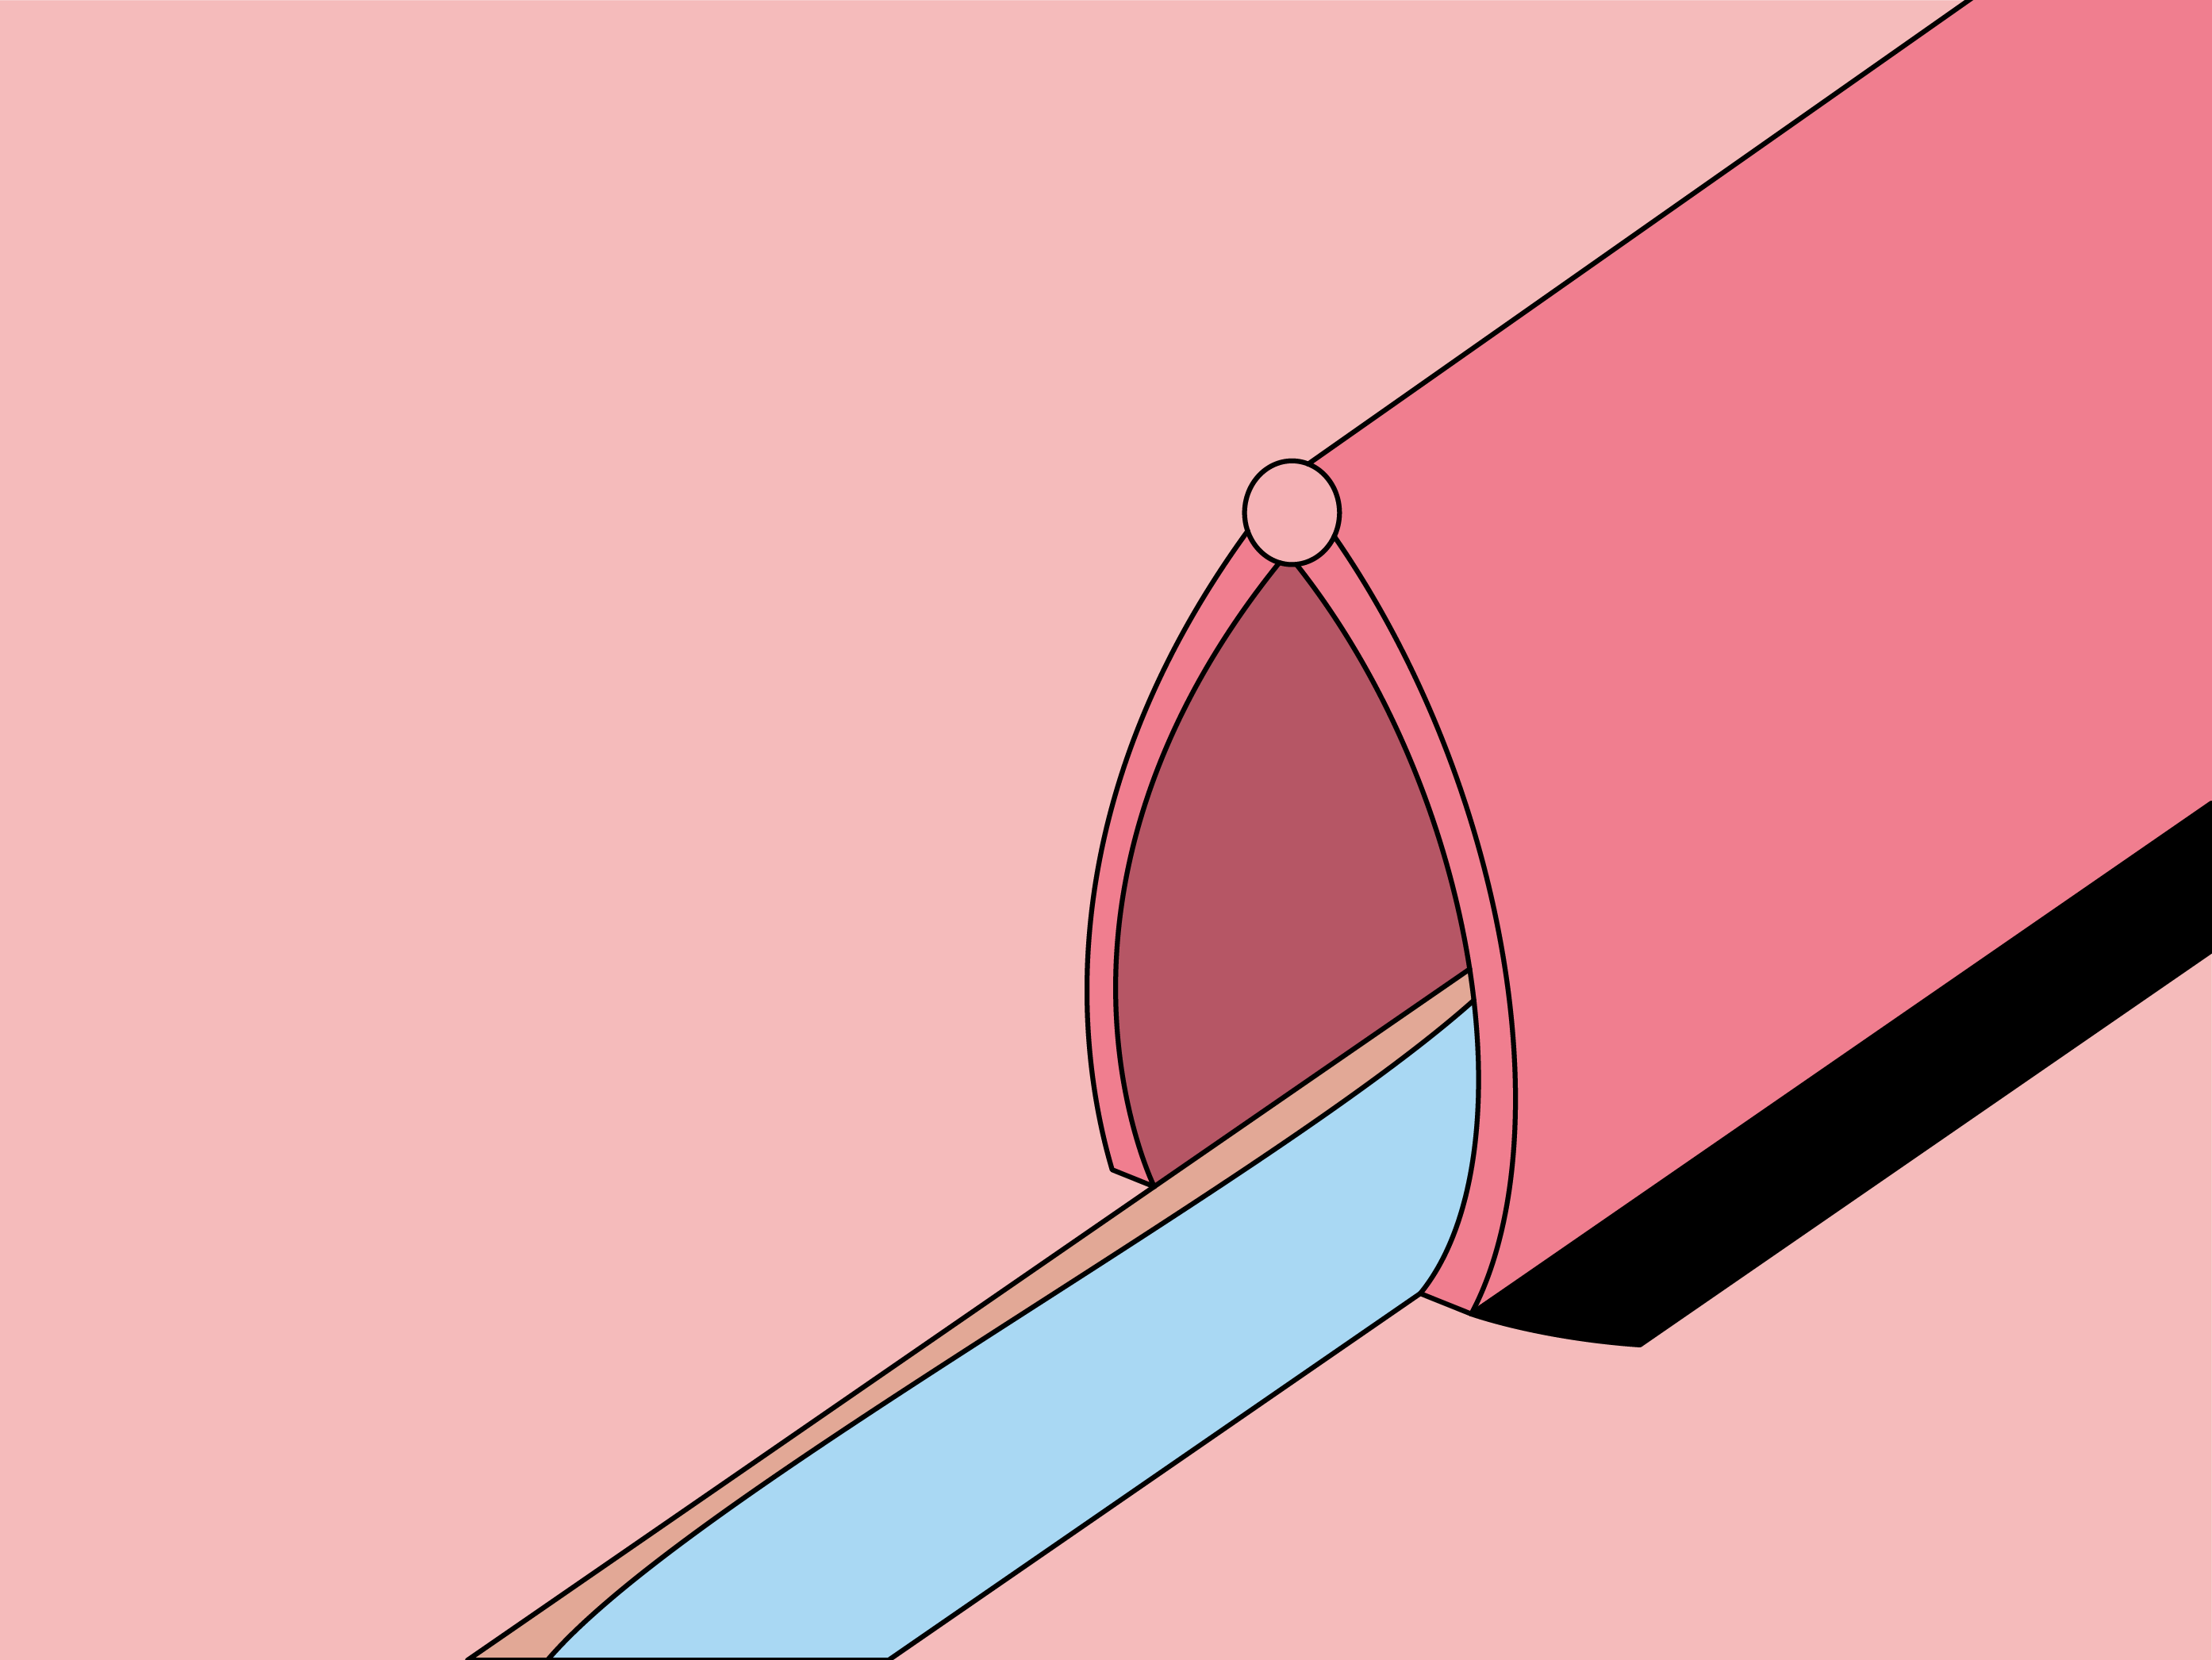 Thinx - Periodical - Keeping Up With Vagina Health Before & After Sex